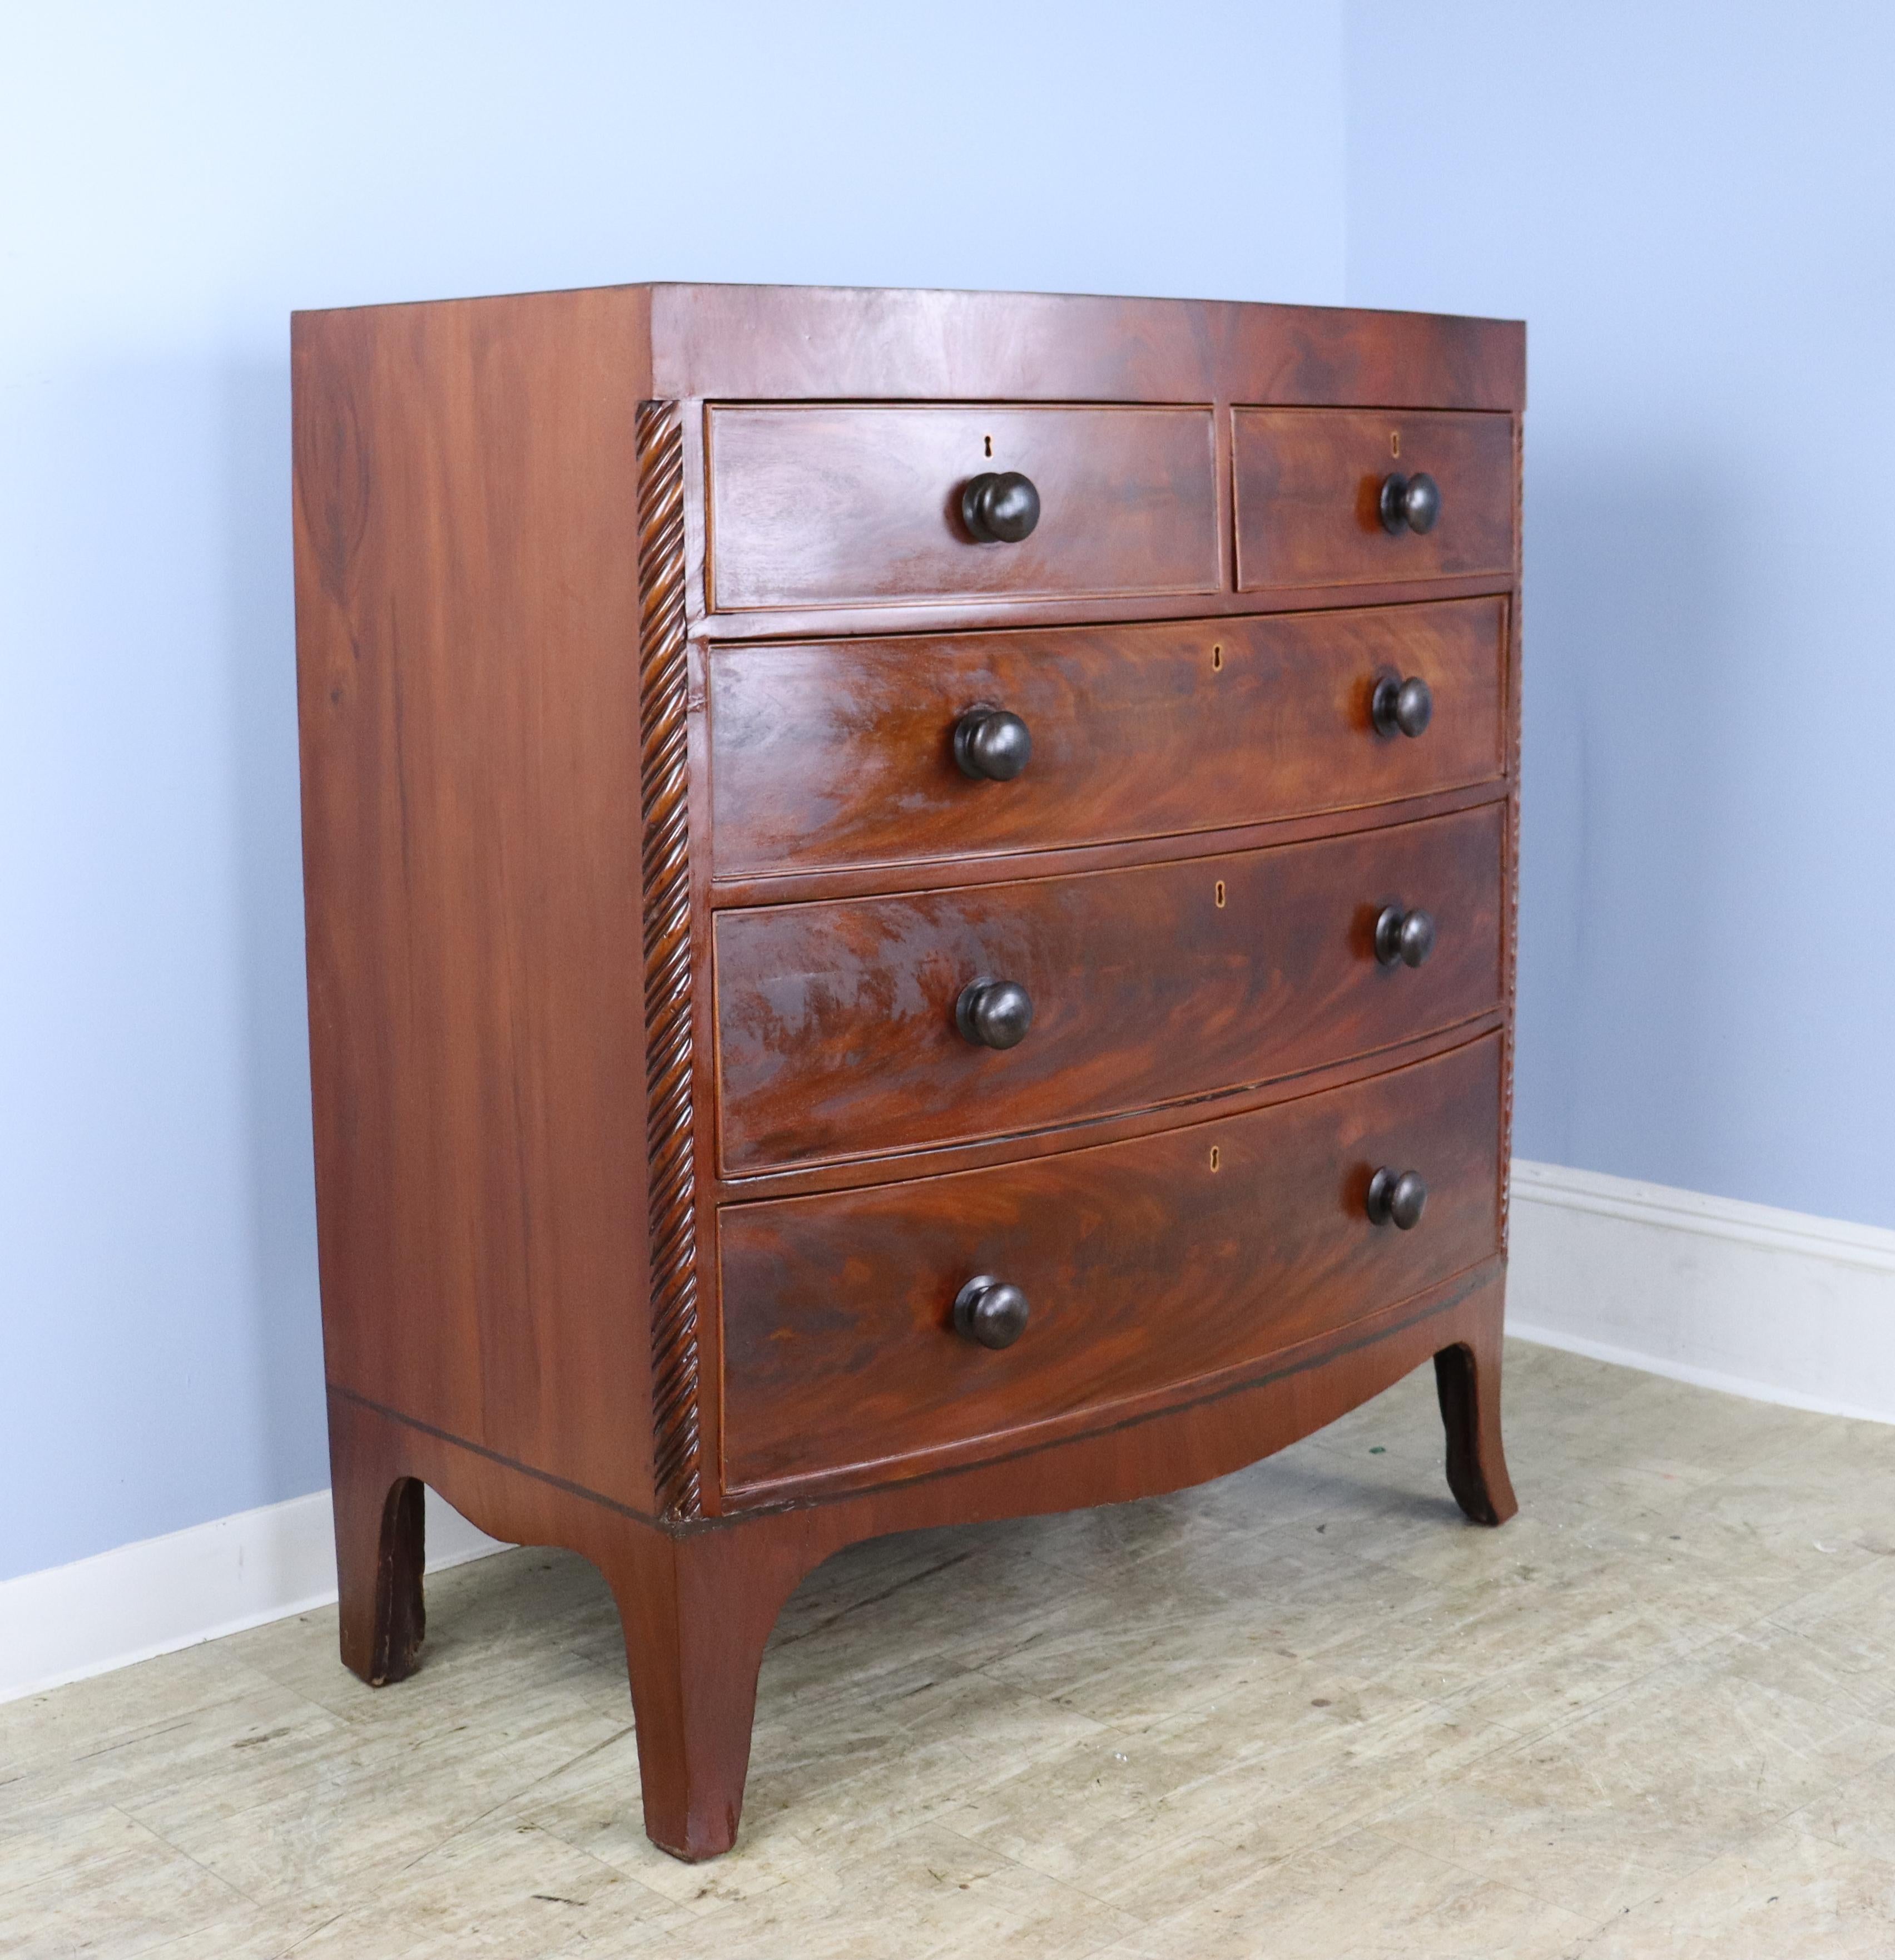 A handsome early bowfront chest of drawers with spiral carved corner columns. The glowing mahogany veneer is in good antique condition, as is the cockbeading around the drawers. Inside the 5 roomy drawers are traces of the original blue paper. Nice